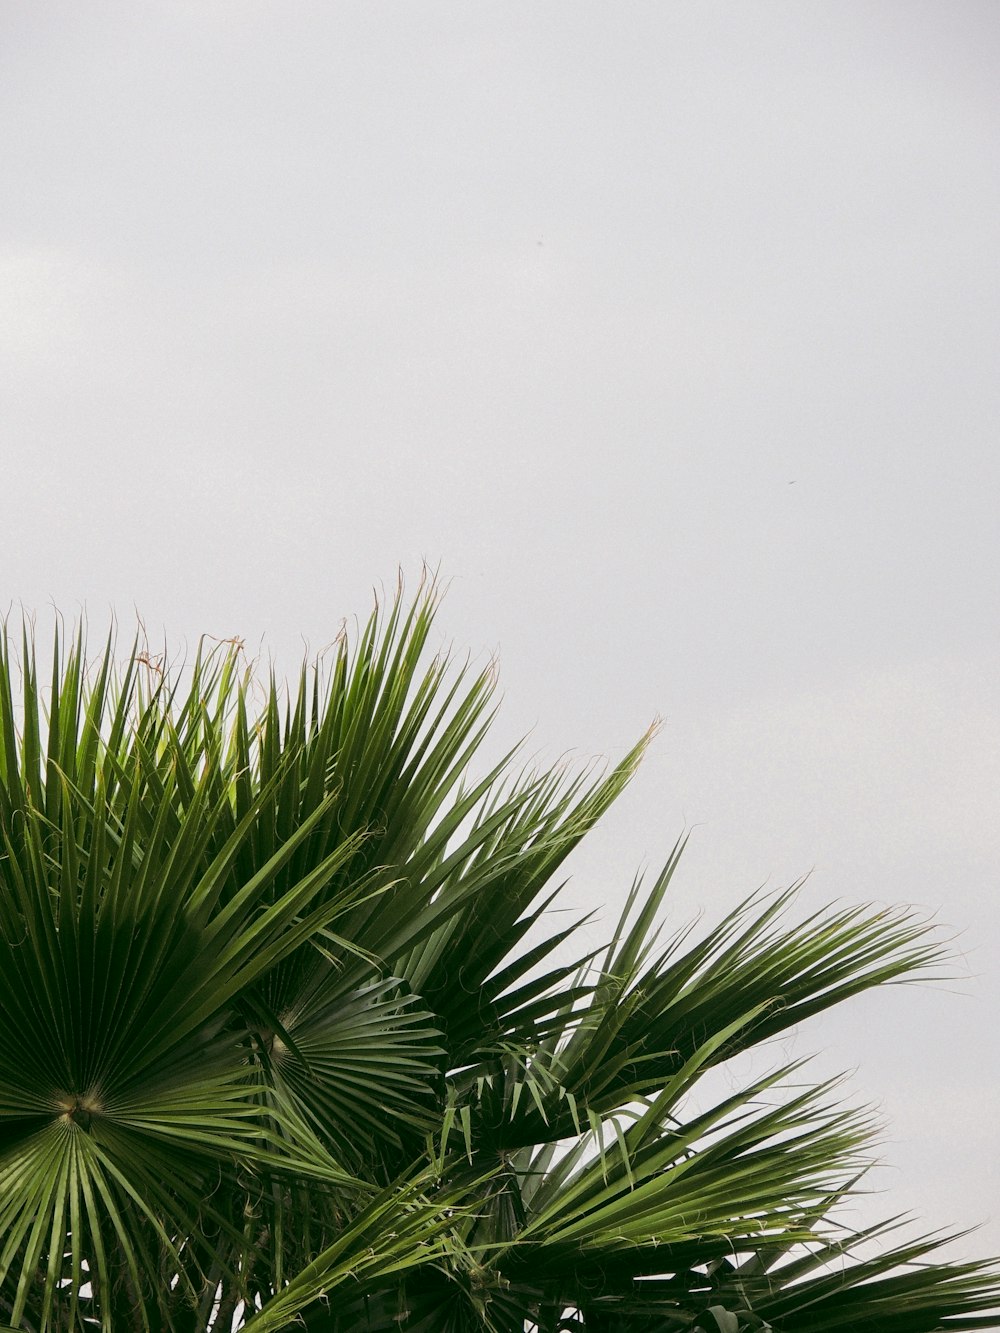 a bird is perched on top of a palm tree